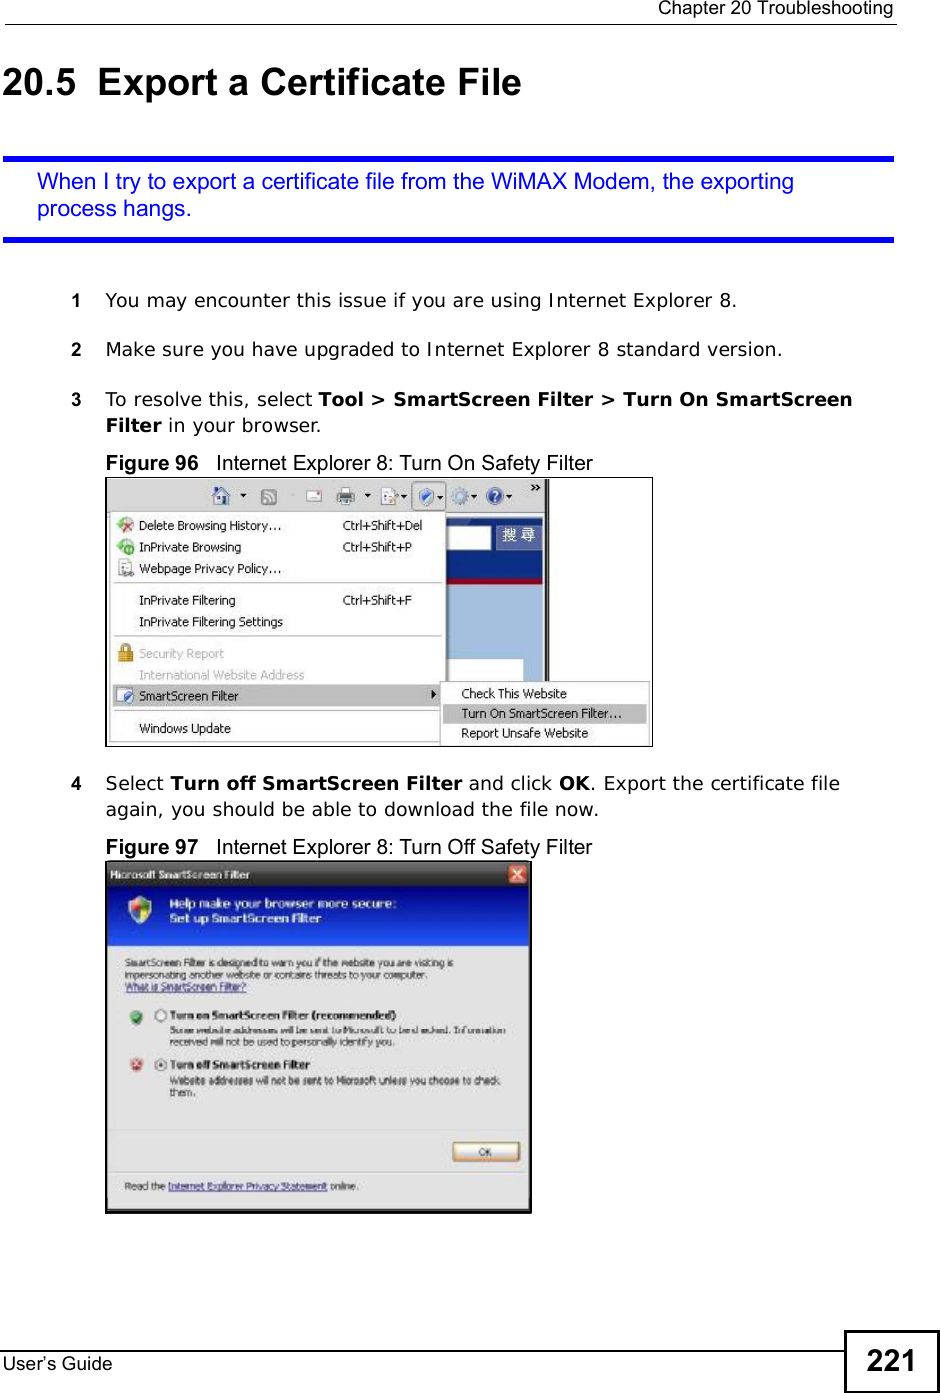  Chapter 20TroubleshootingUser s Guide 22120.5  Export a Certificate FileWhen I try to export a certificate file from the WiMAX Modem, the exporting process hangs.1You may encounter this issue if you are using Internet Explorer 8.2Make sure you have upgraded to Internet Explorer 8 standard version.3To resolve this, select Tool &gt; SmartScreen Filter &gt; Turn On SmartScreen Filter in your browser.Figure 96   Internet Explorer 8: Turn On Safety Filter4Select Turn off SmartScreen Filter and click OK. Export the certificate file again, you should be able to download the file now.Figure 97   Internet Explorer 8: Turn Off Safety Filter